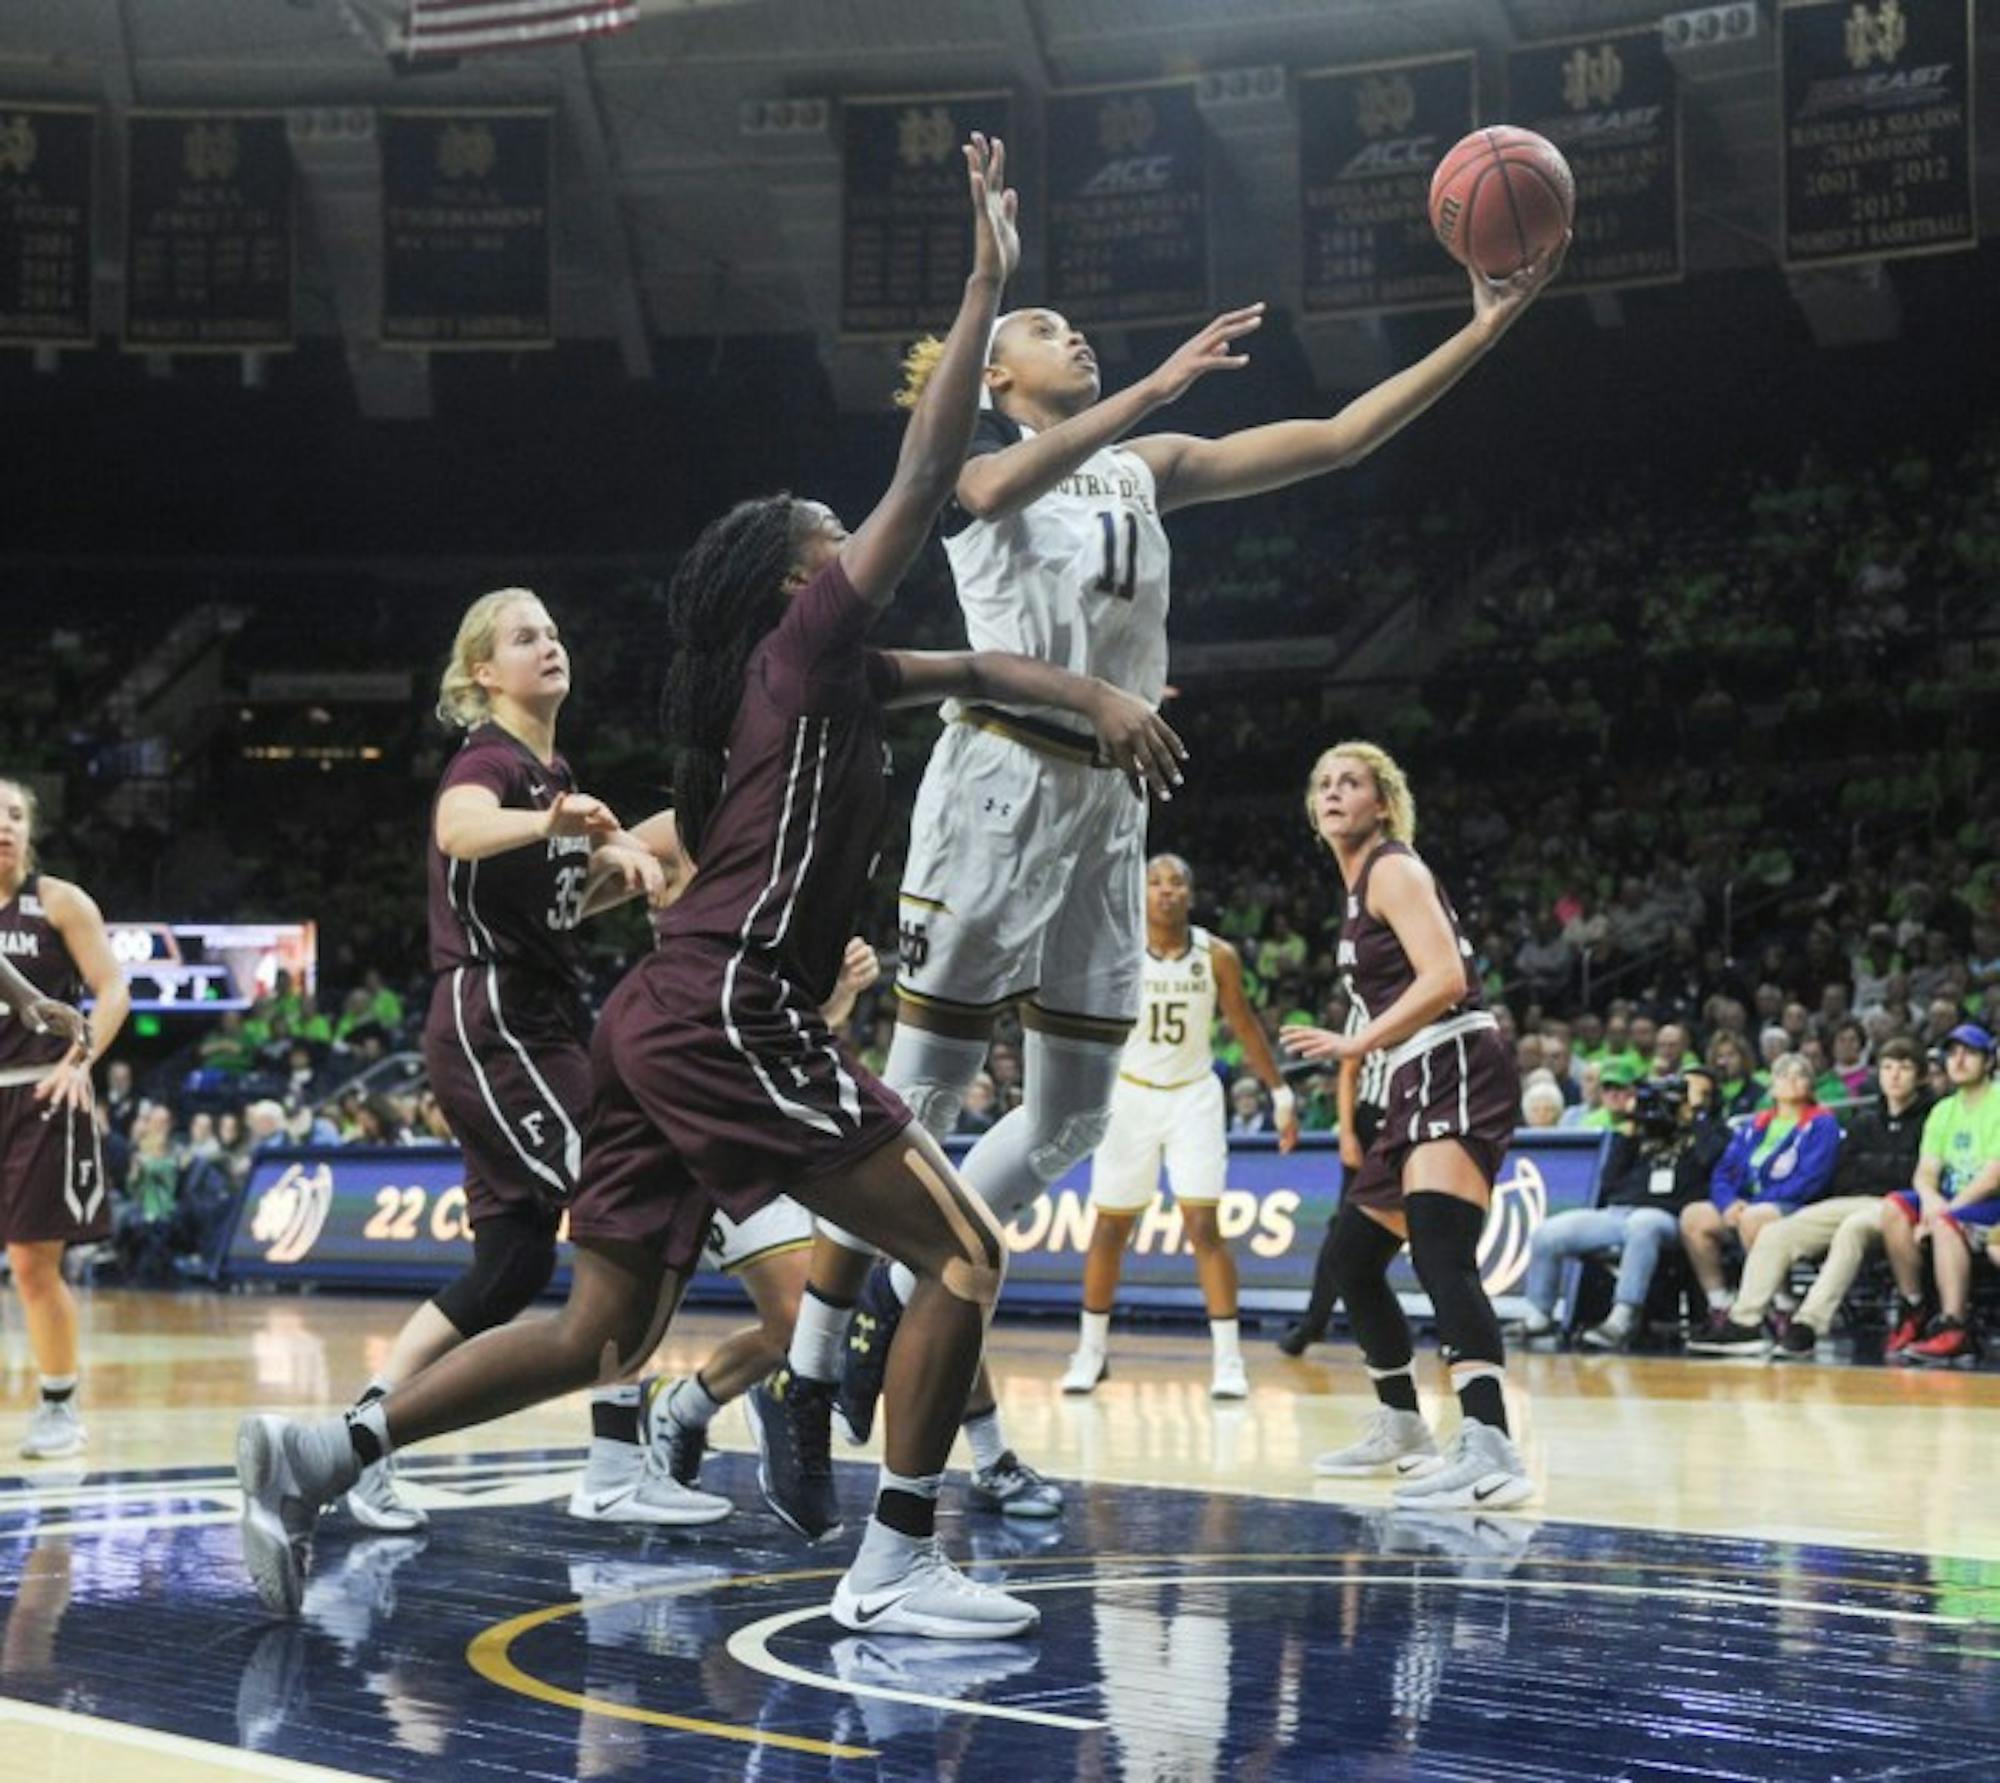 Junior forward Brianna Turner extends for a layup during Notre Dame’s 67-36 victory over Fordham on Nov. 14 at Purcell Pavilion. Turner is averaging 13.3 points on a team-high .579 percentage on the season.